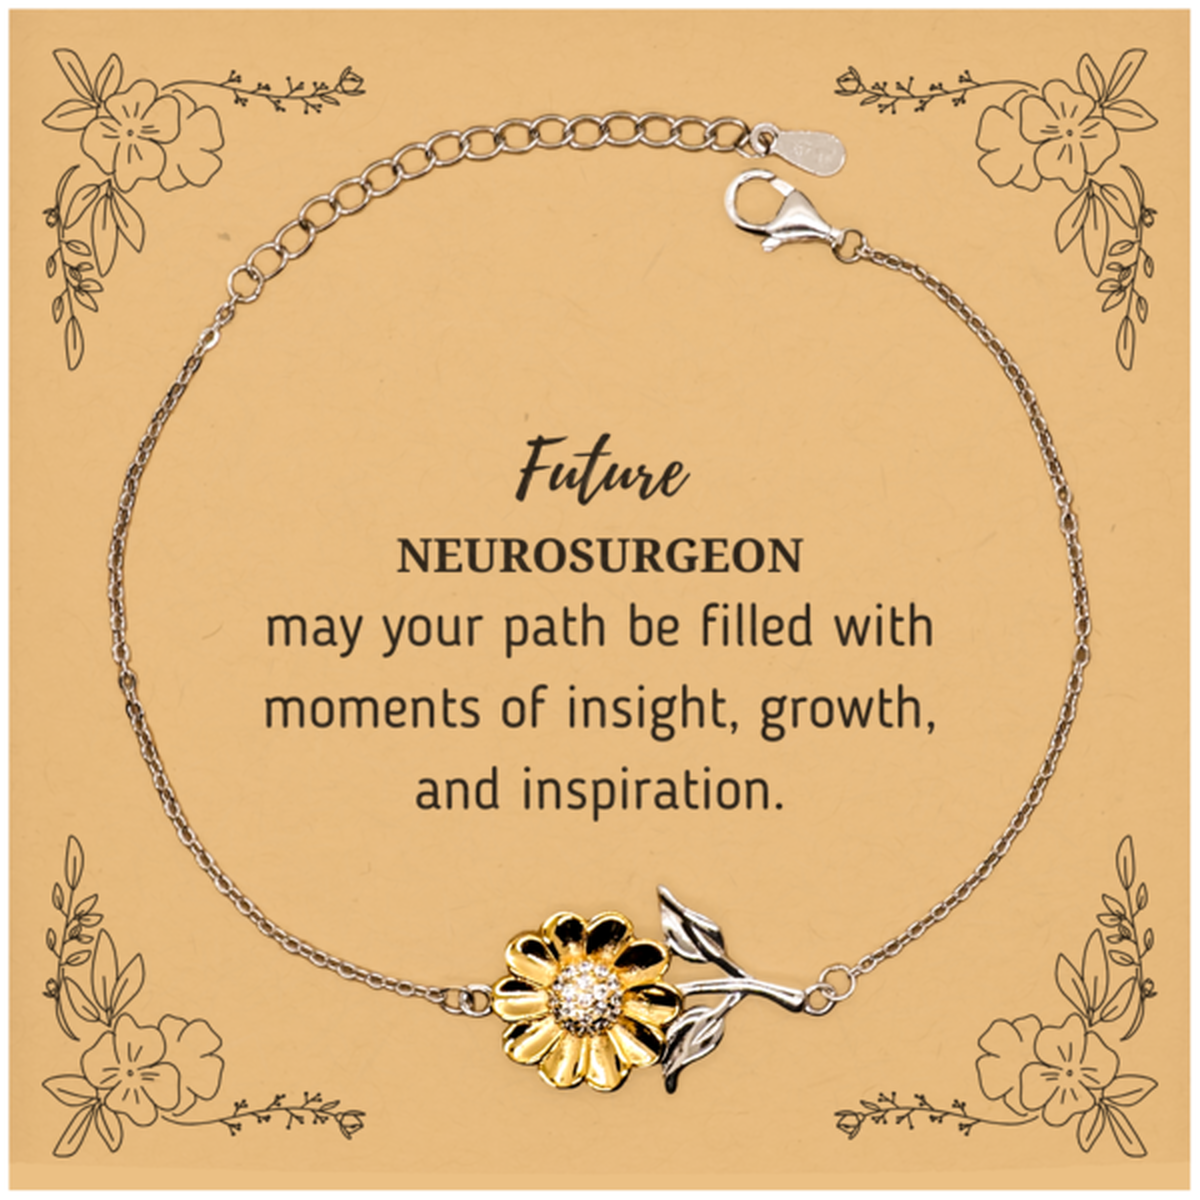 Future Neurosurgeon Gifts, May your path be filled with moments of insight, Graduation Gifts for New Neurosurgeon, Christmas Unique Sunflower Bracelet For Men, Women, Friends